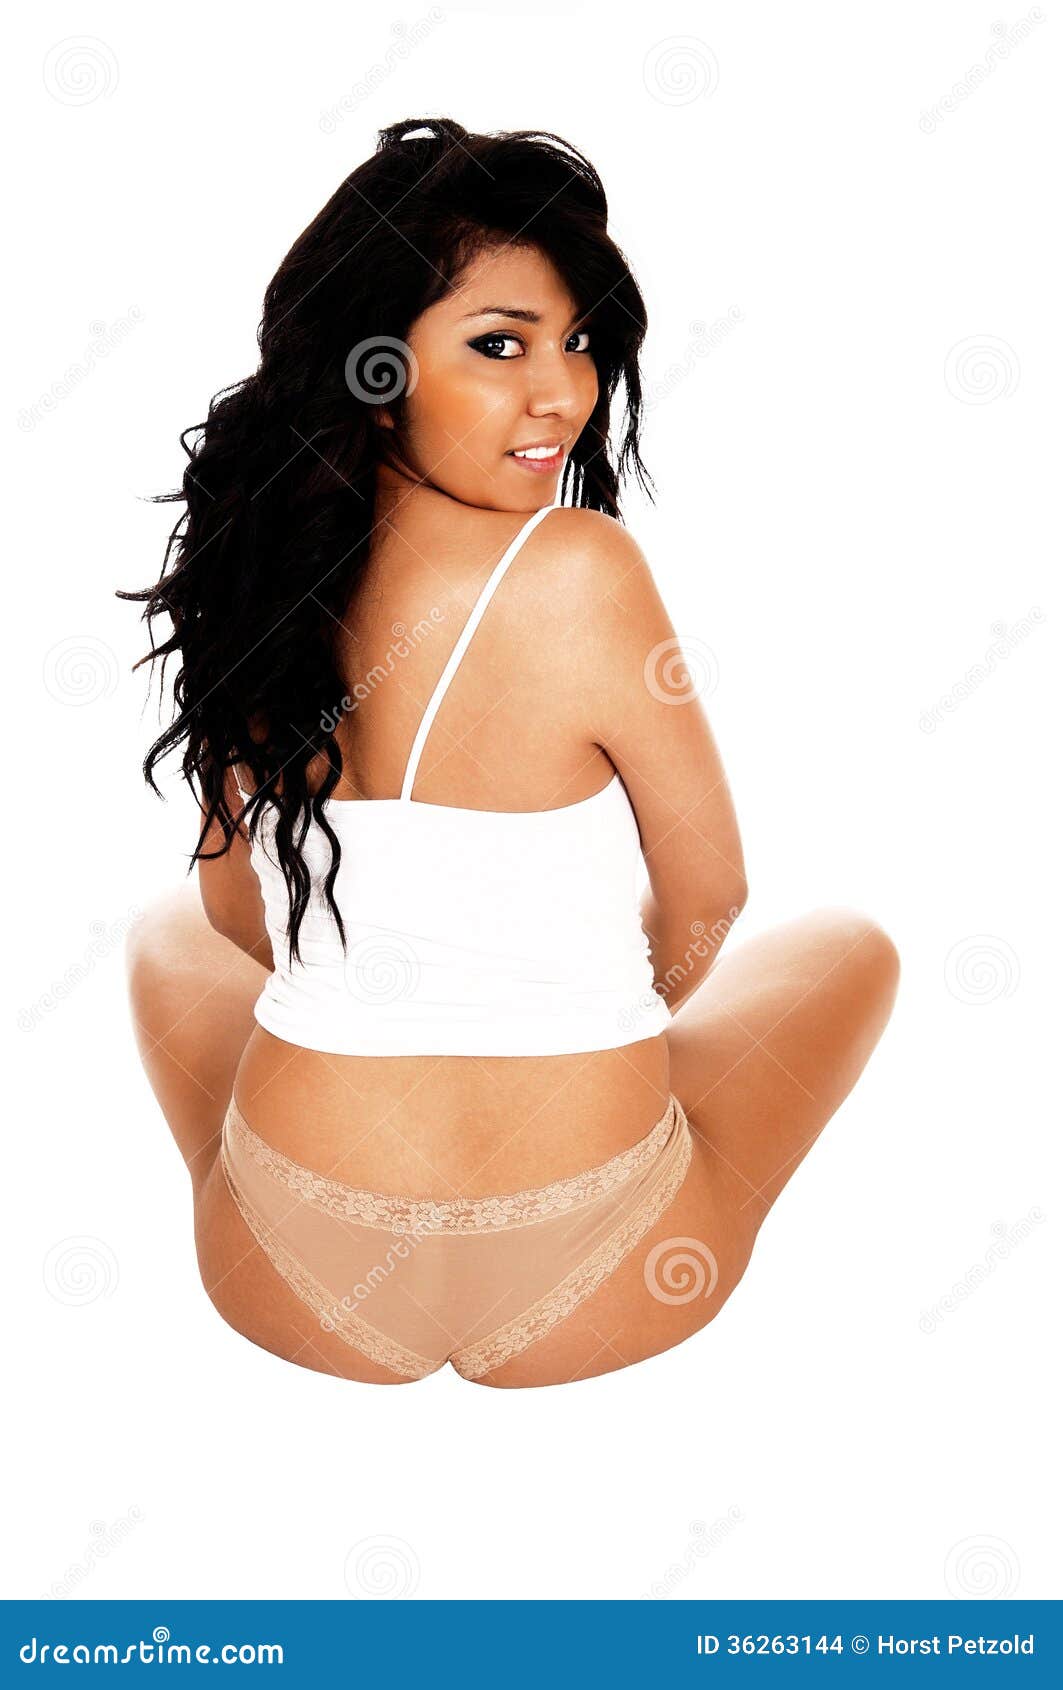 Girl sitting in panties. stock photo. Image of person - 36263144